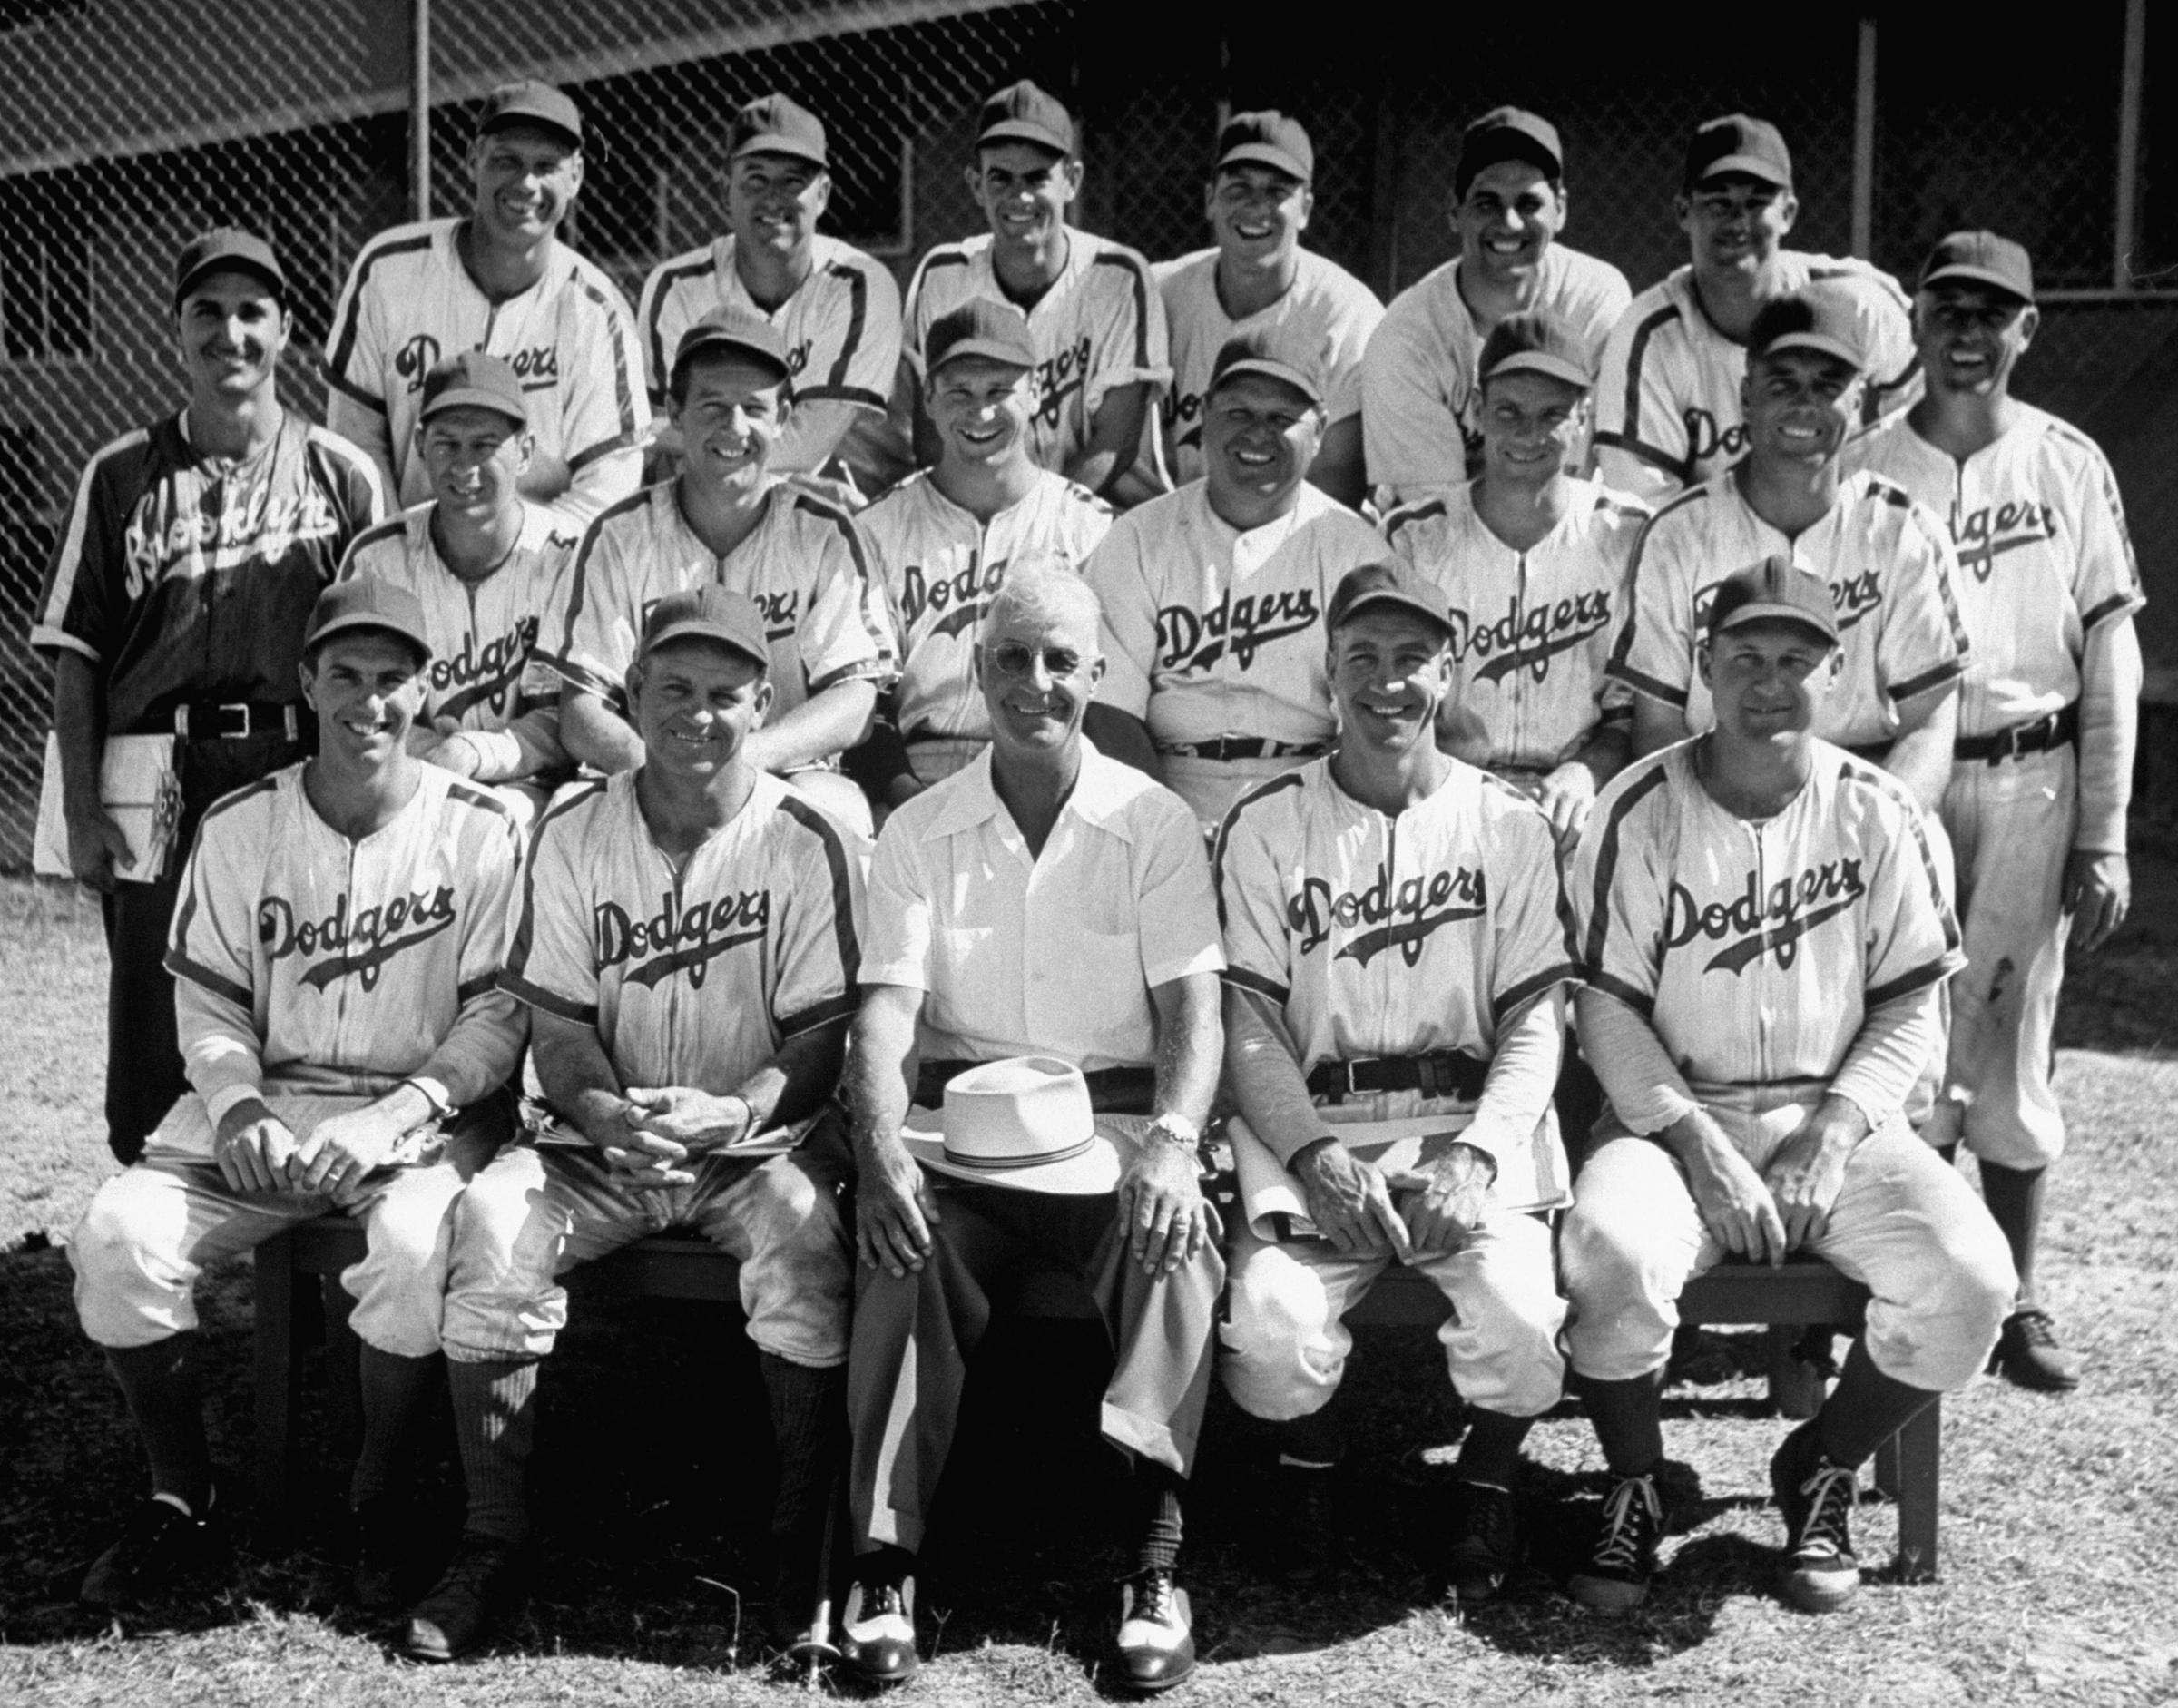 Brooklyn coaches pose for a group portrait during spring training at Dodgertown, Vero Beach, Fla., 1948.